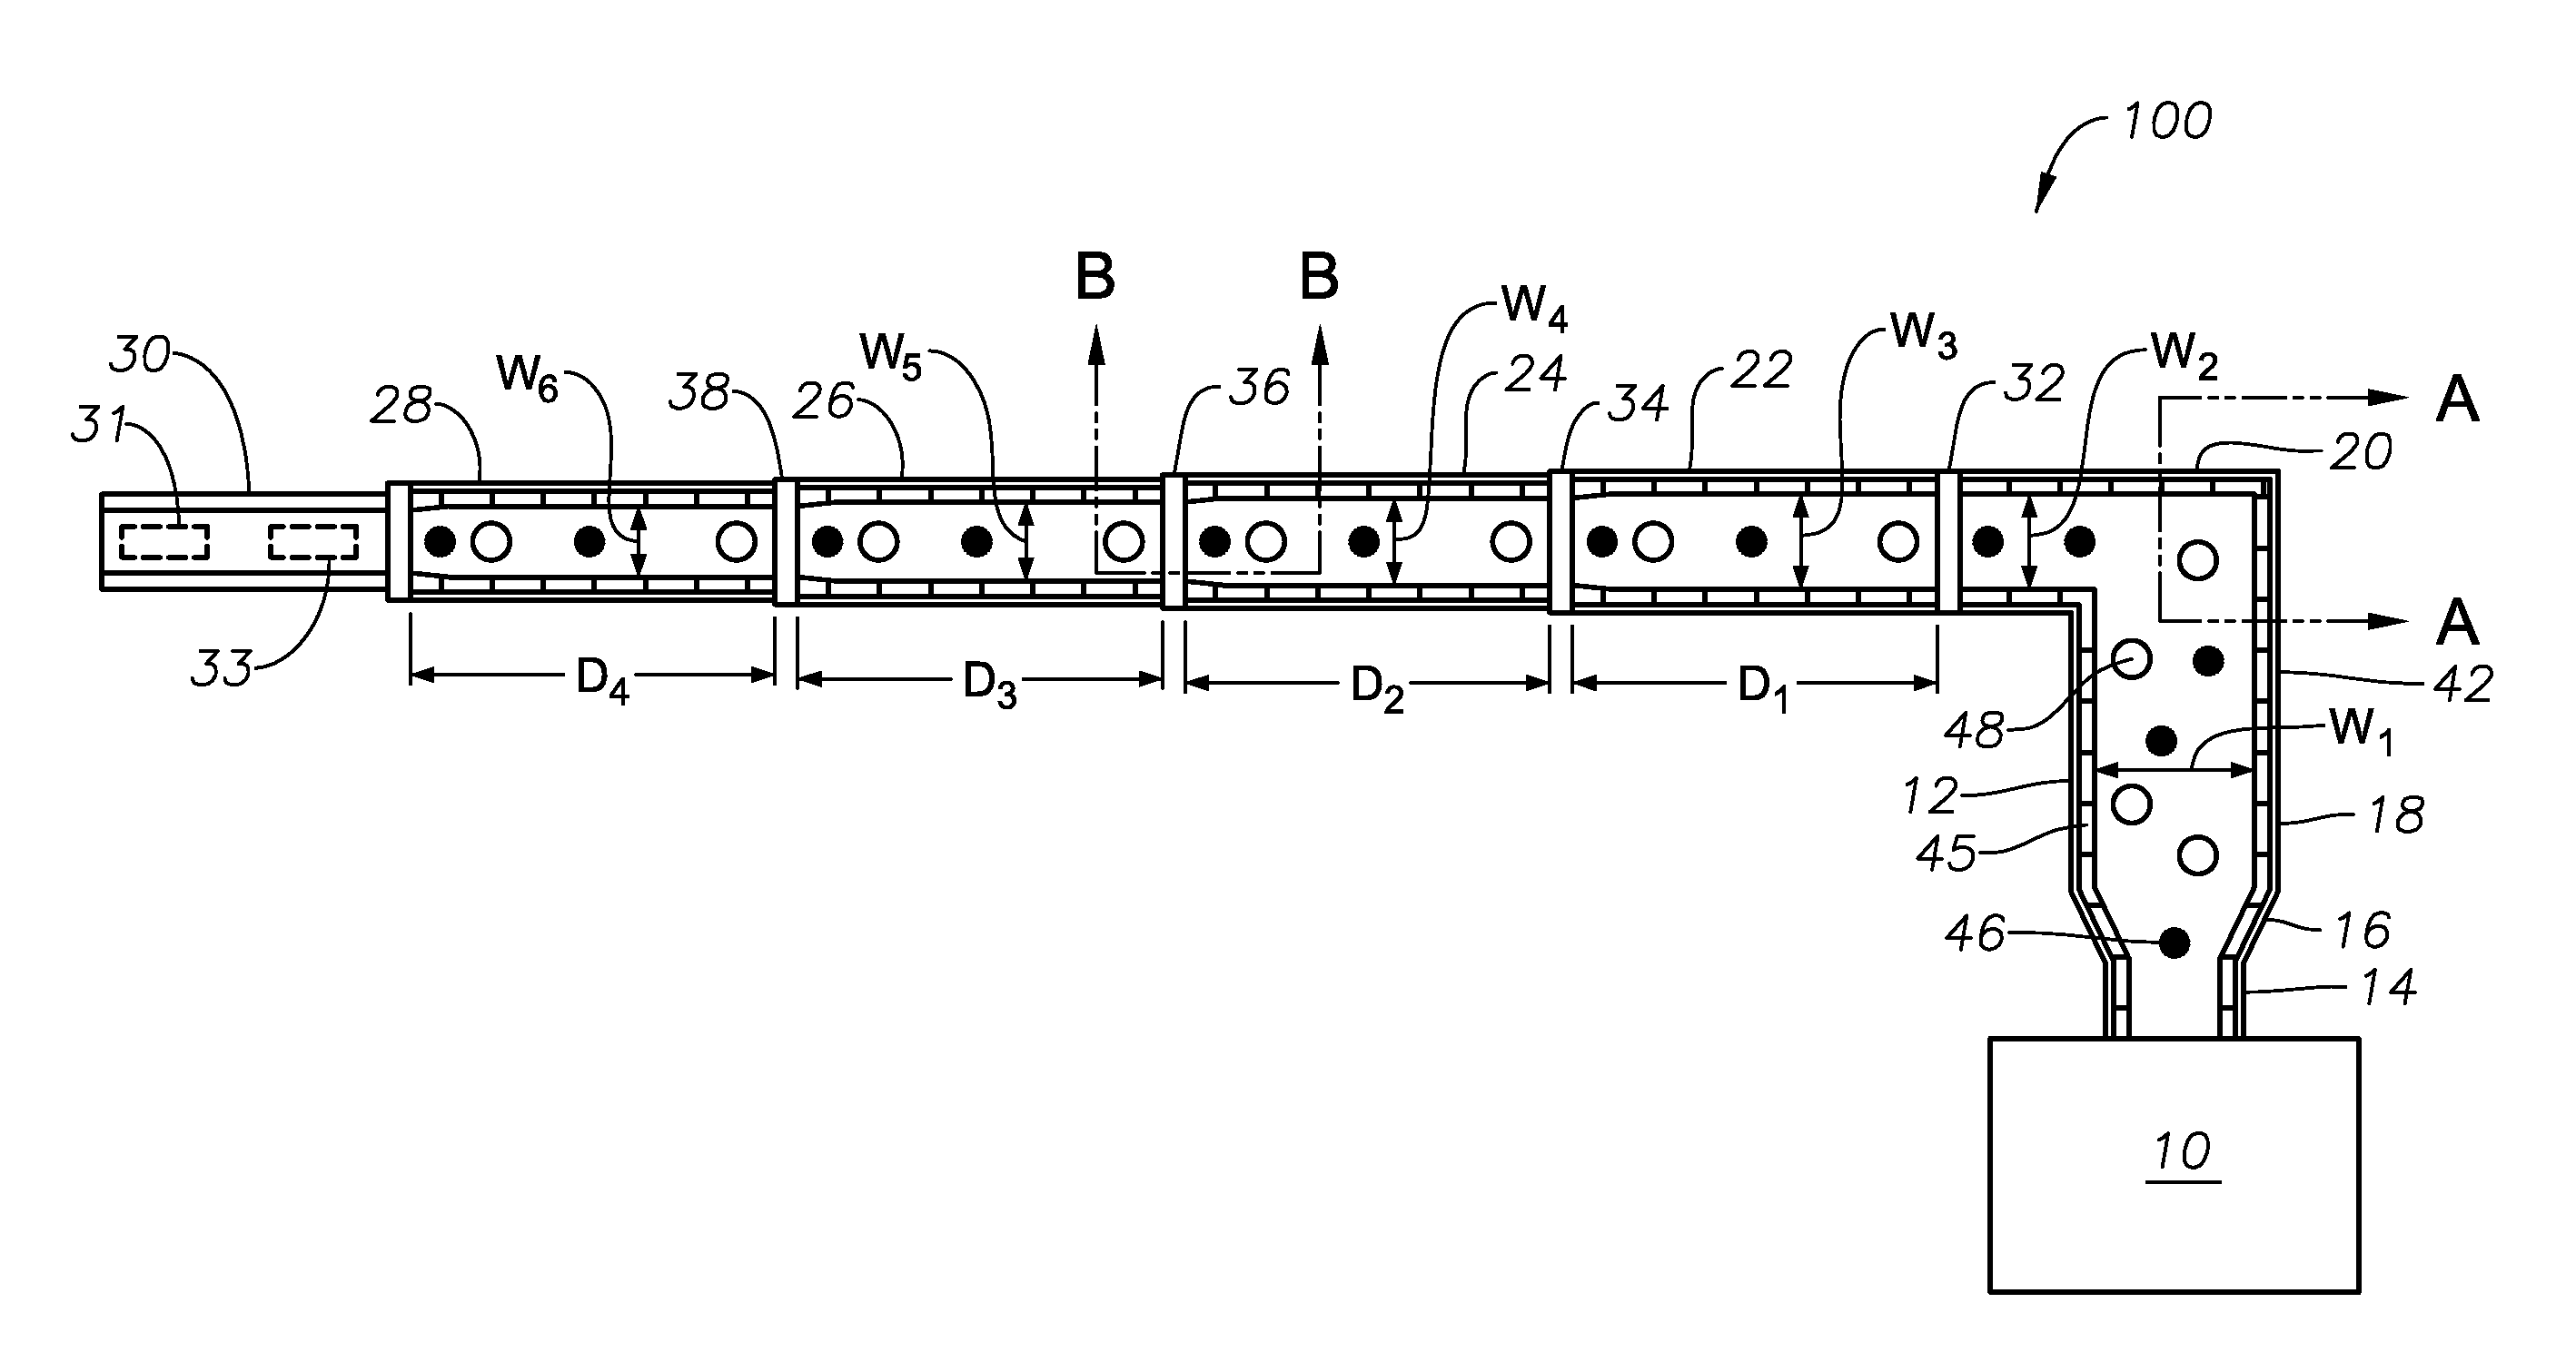 Apparatus, systems and methods for conditioning molten glass